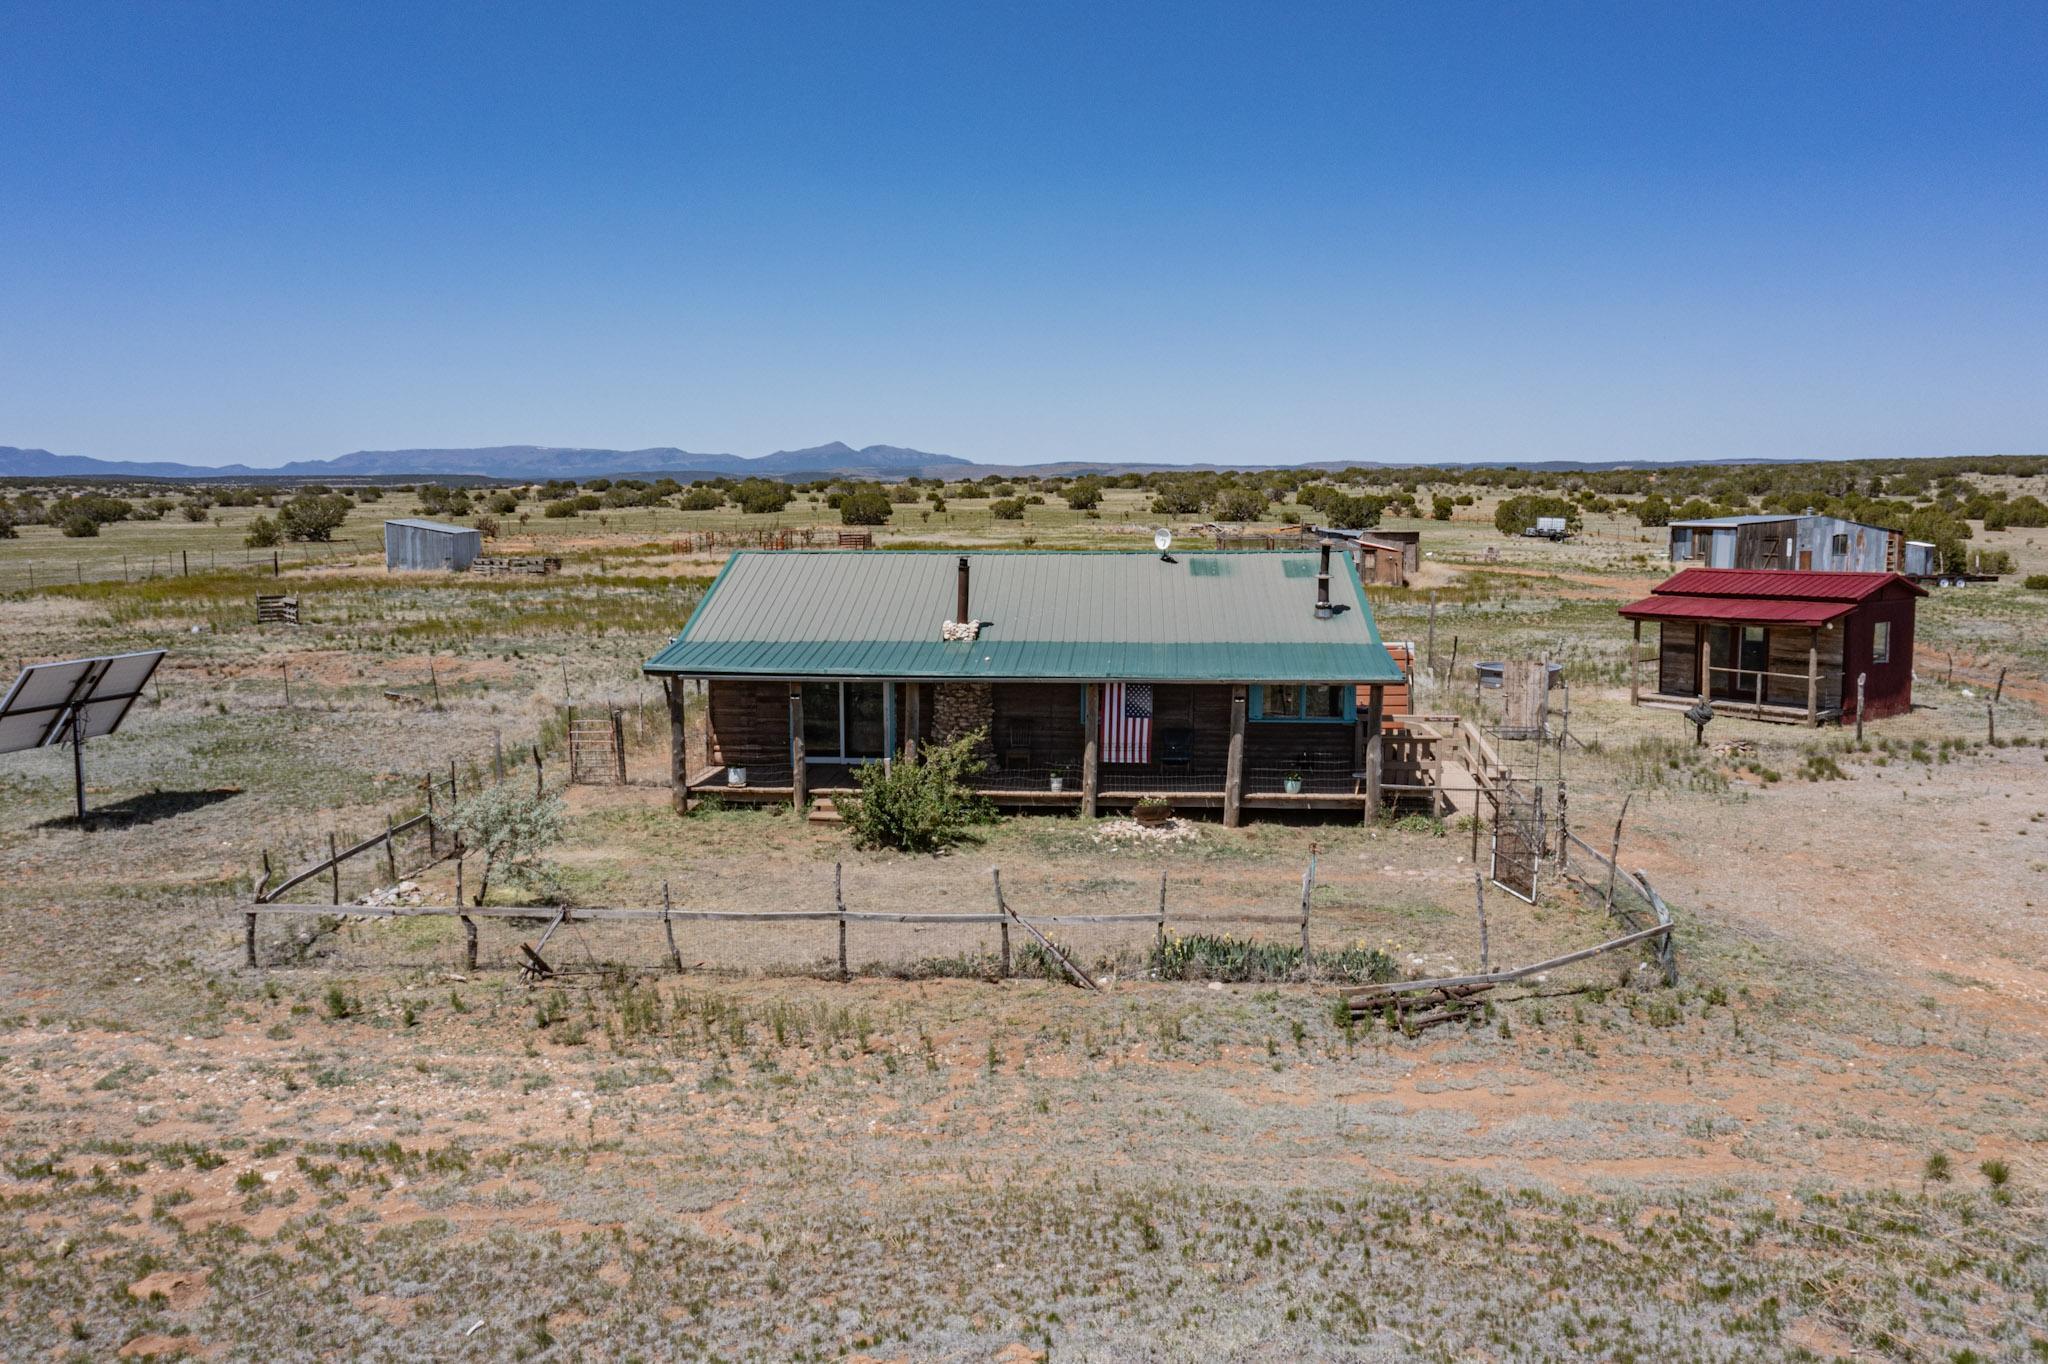 550 Peacock Road, McIntosh, New Mexico 87032, 2 Bedrooms Bedrooms, ,1 BathroomBathrooms,Residential,For Sale,550 Peacock Road,1062119